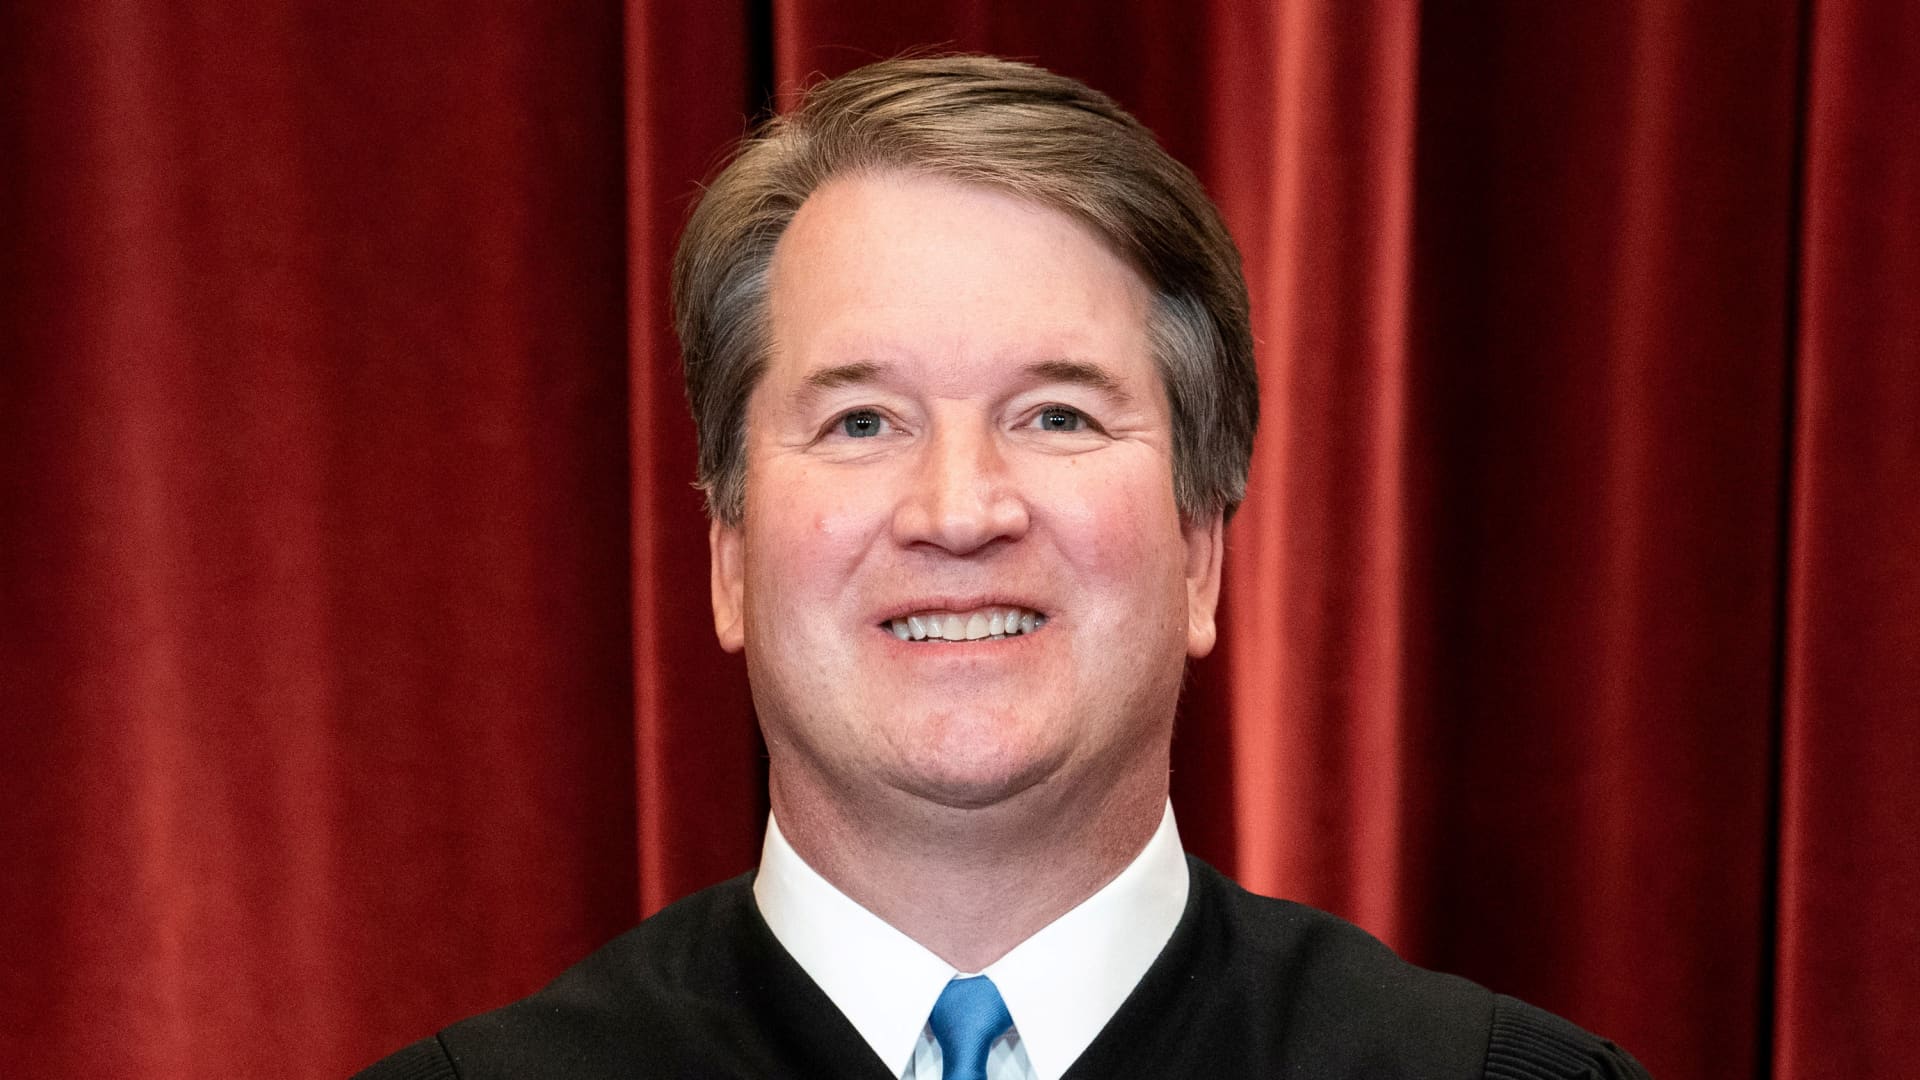 Armed man who sought to kill Brett Kavanaugh arrested near Supreme Court justice..